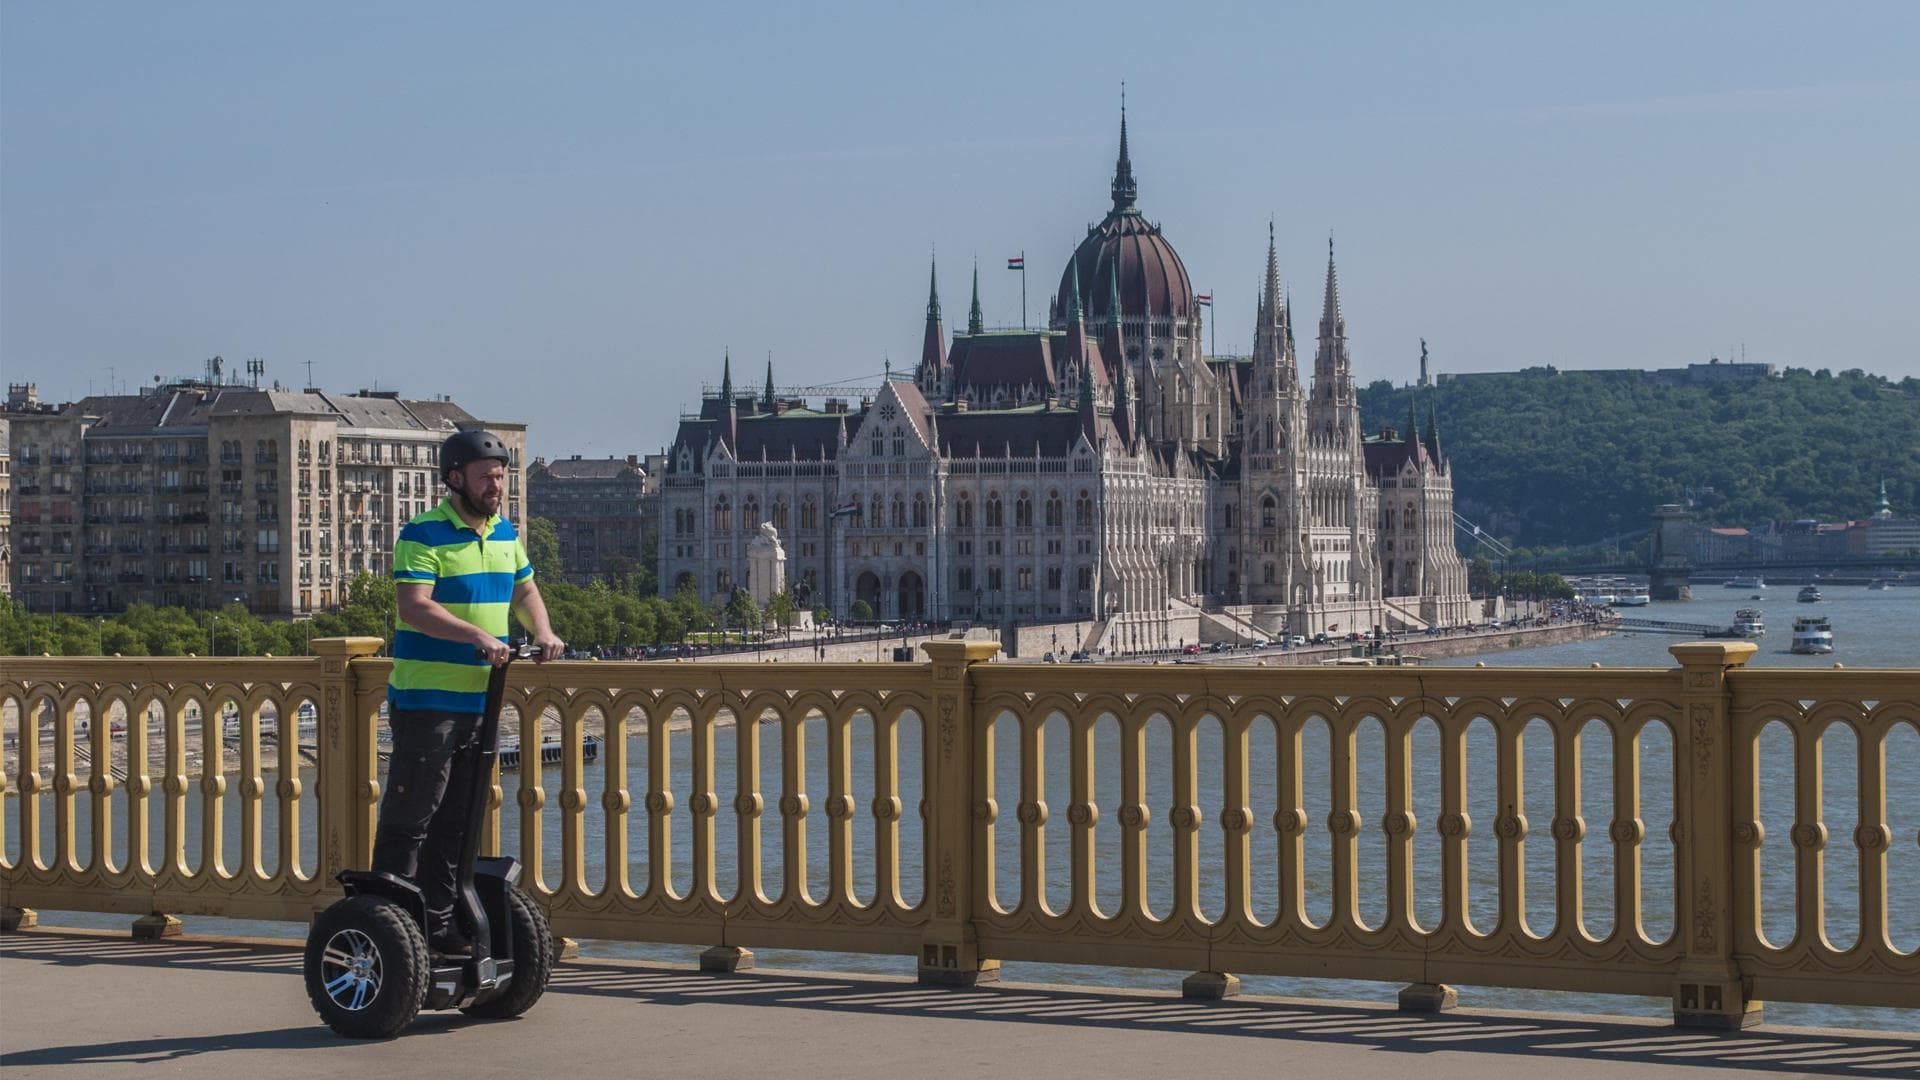 Tours in heart of the city. Top sights in Budapest: Parliament, Danube, Margaret Island - Budapestrolling